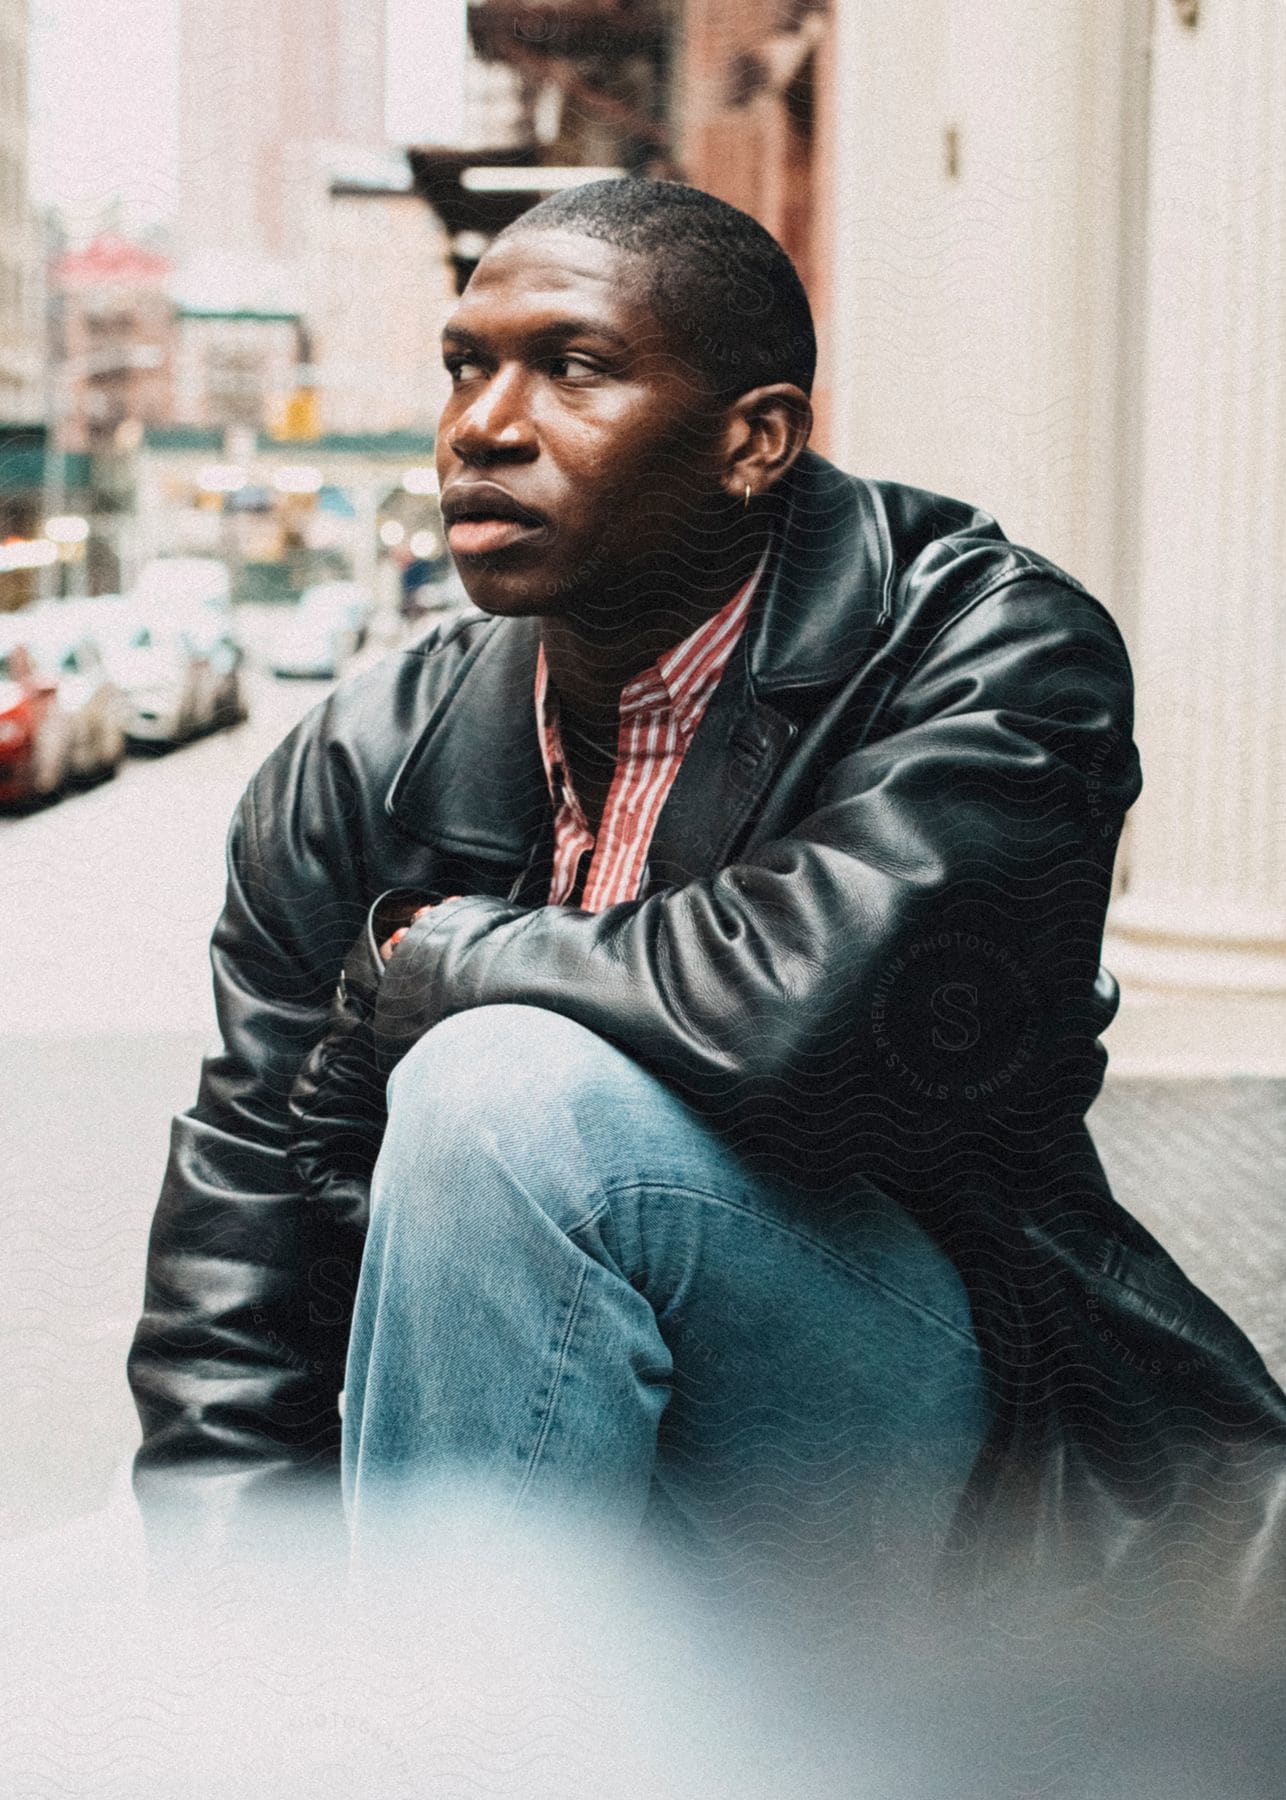 A man sitting on the sidewalk in an urban environment, wearing a black leather jacket, blue jeans and a red and white checkered shirt.